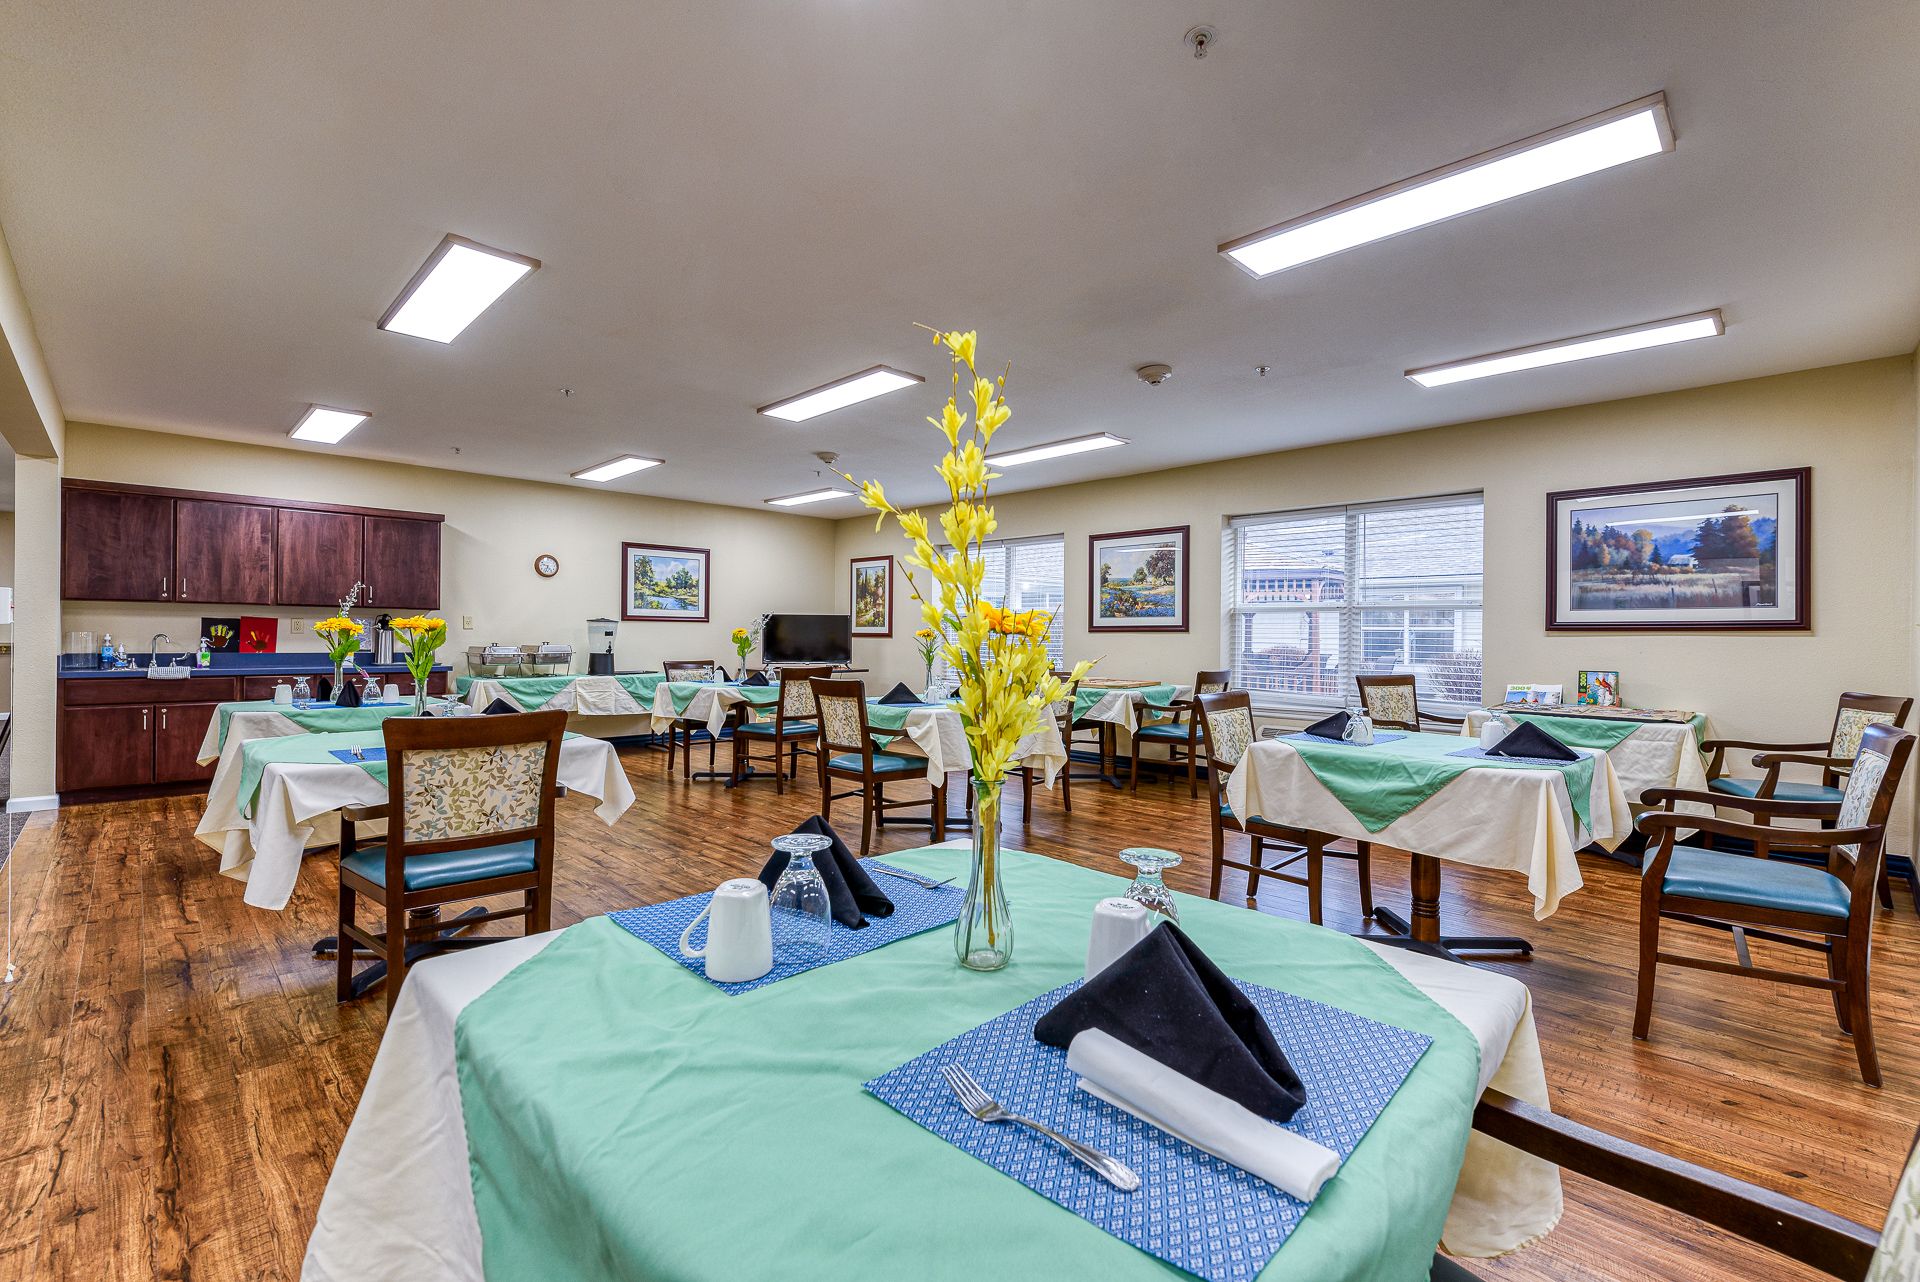 Awbrey Place Assisted Living and Memory Care 3